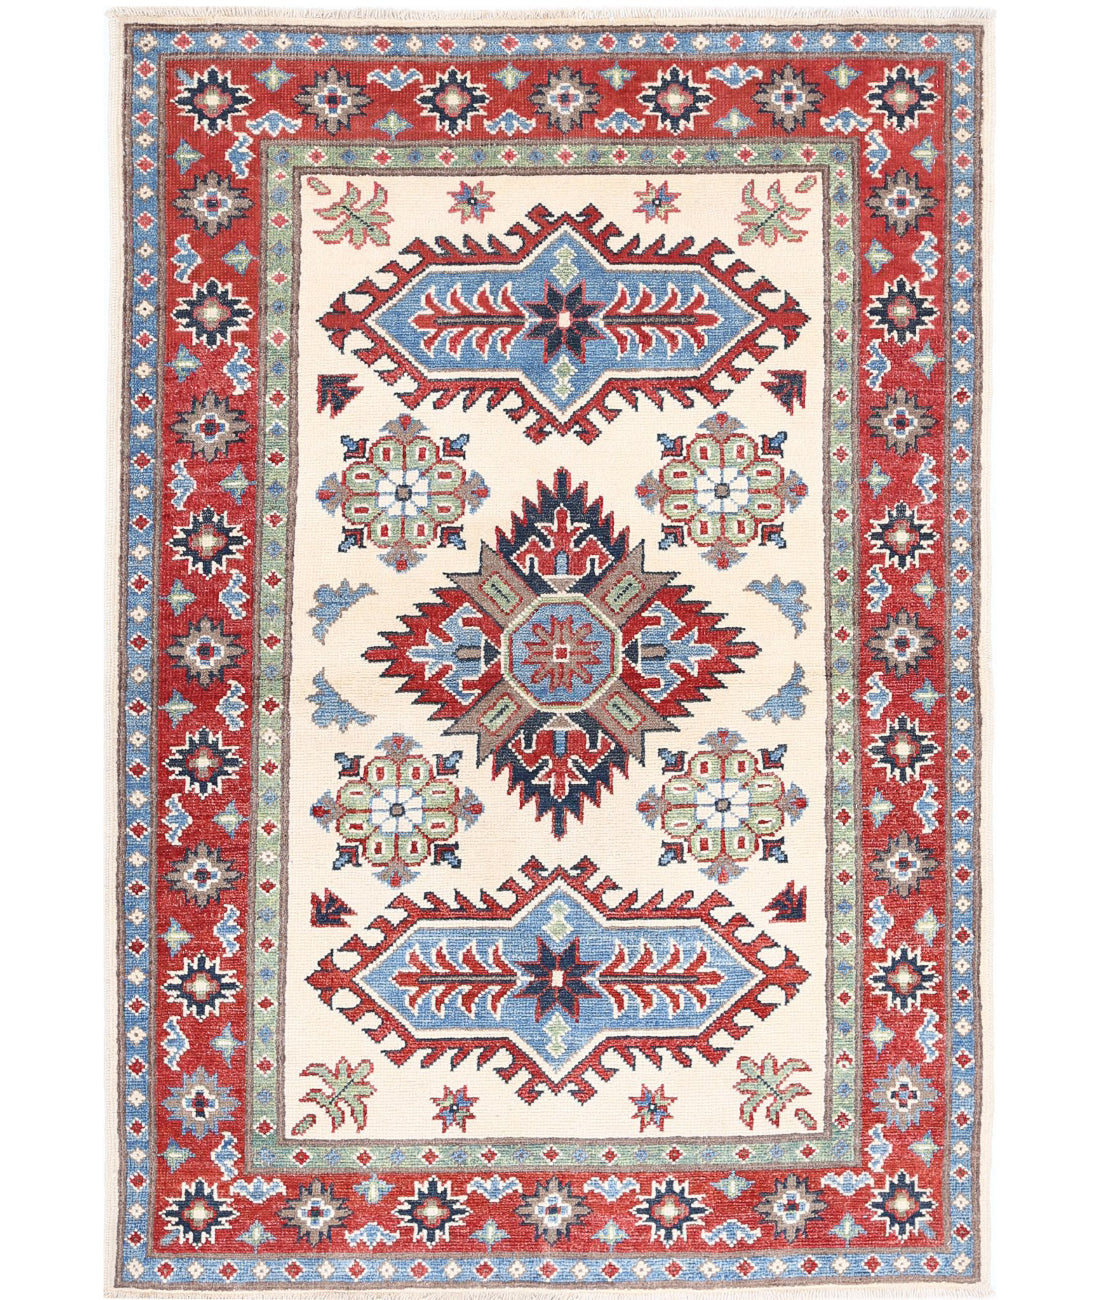 Hand Knotted Tribal Kazak Wool Rug - 3'4'' x 4'10'' 3'4'' x 4'10'' (100 X 145) / Ivory / Red